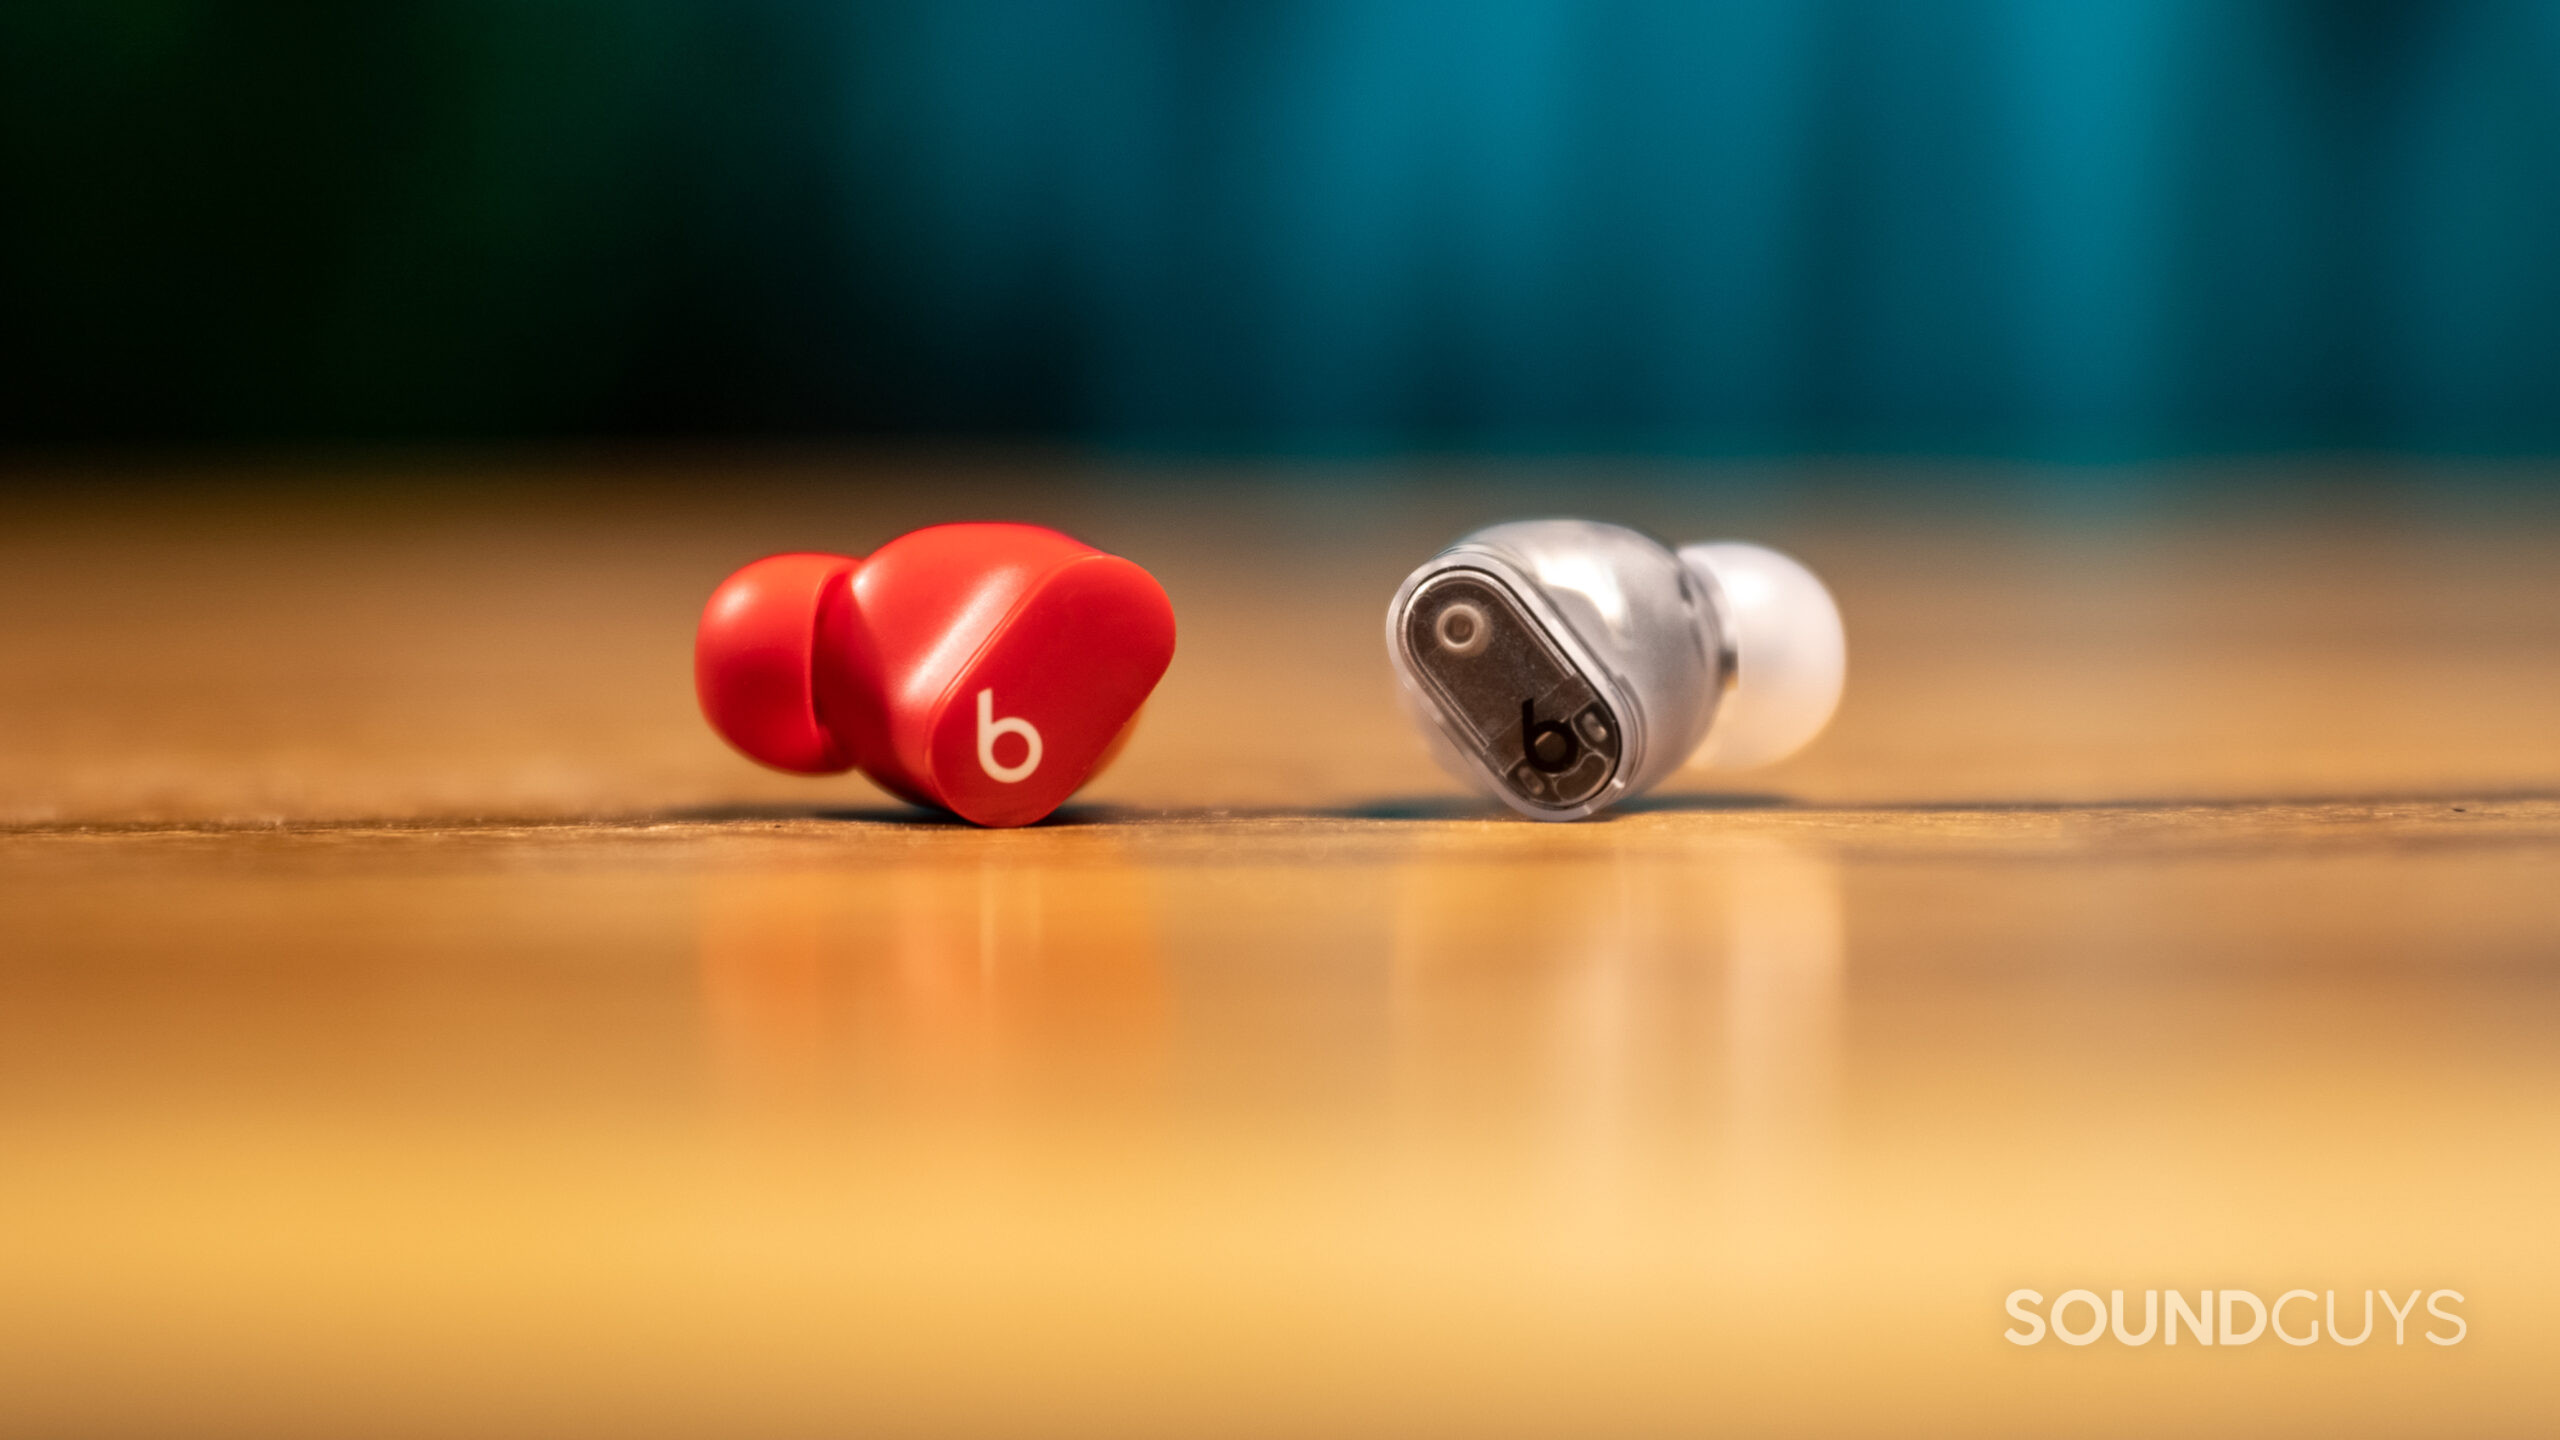 The Beats Studio Buds and Studio Buds Plus earbuds side by side for comparison.